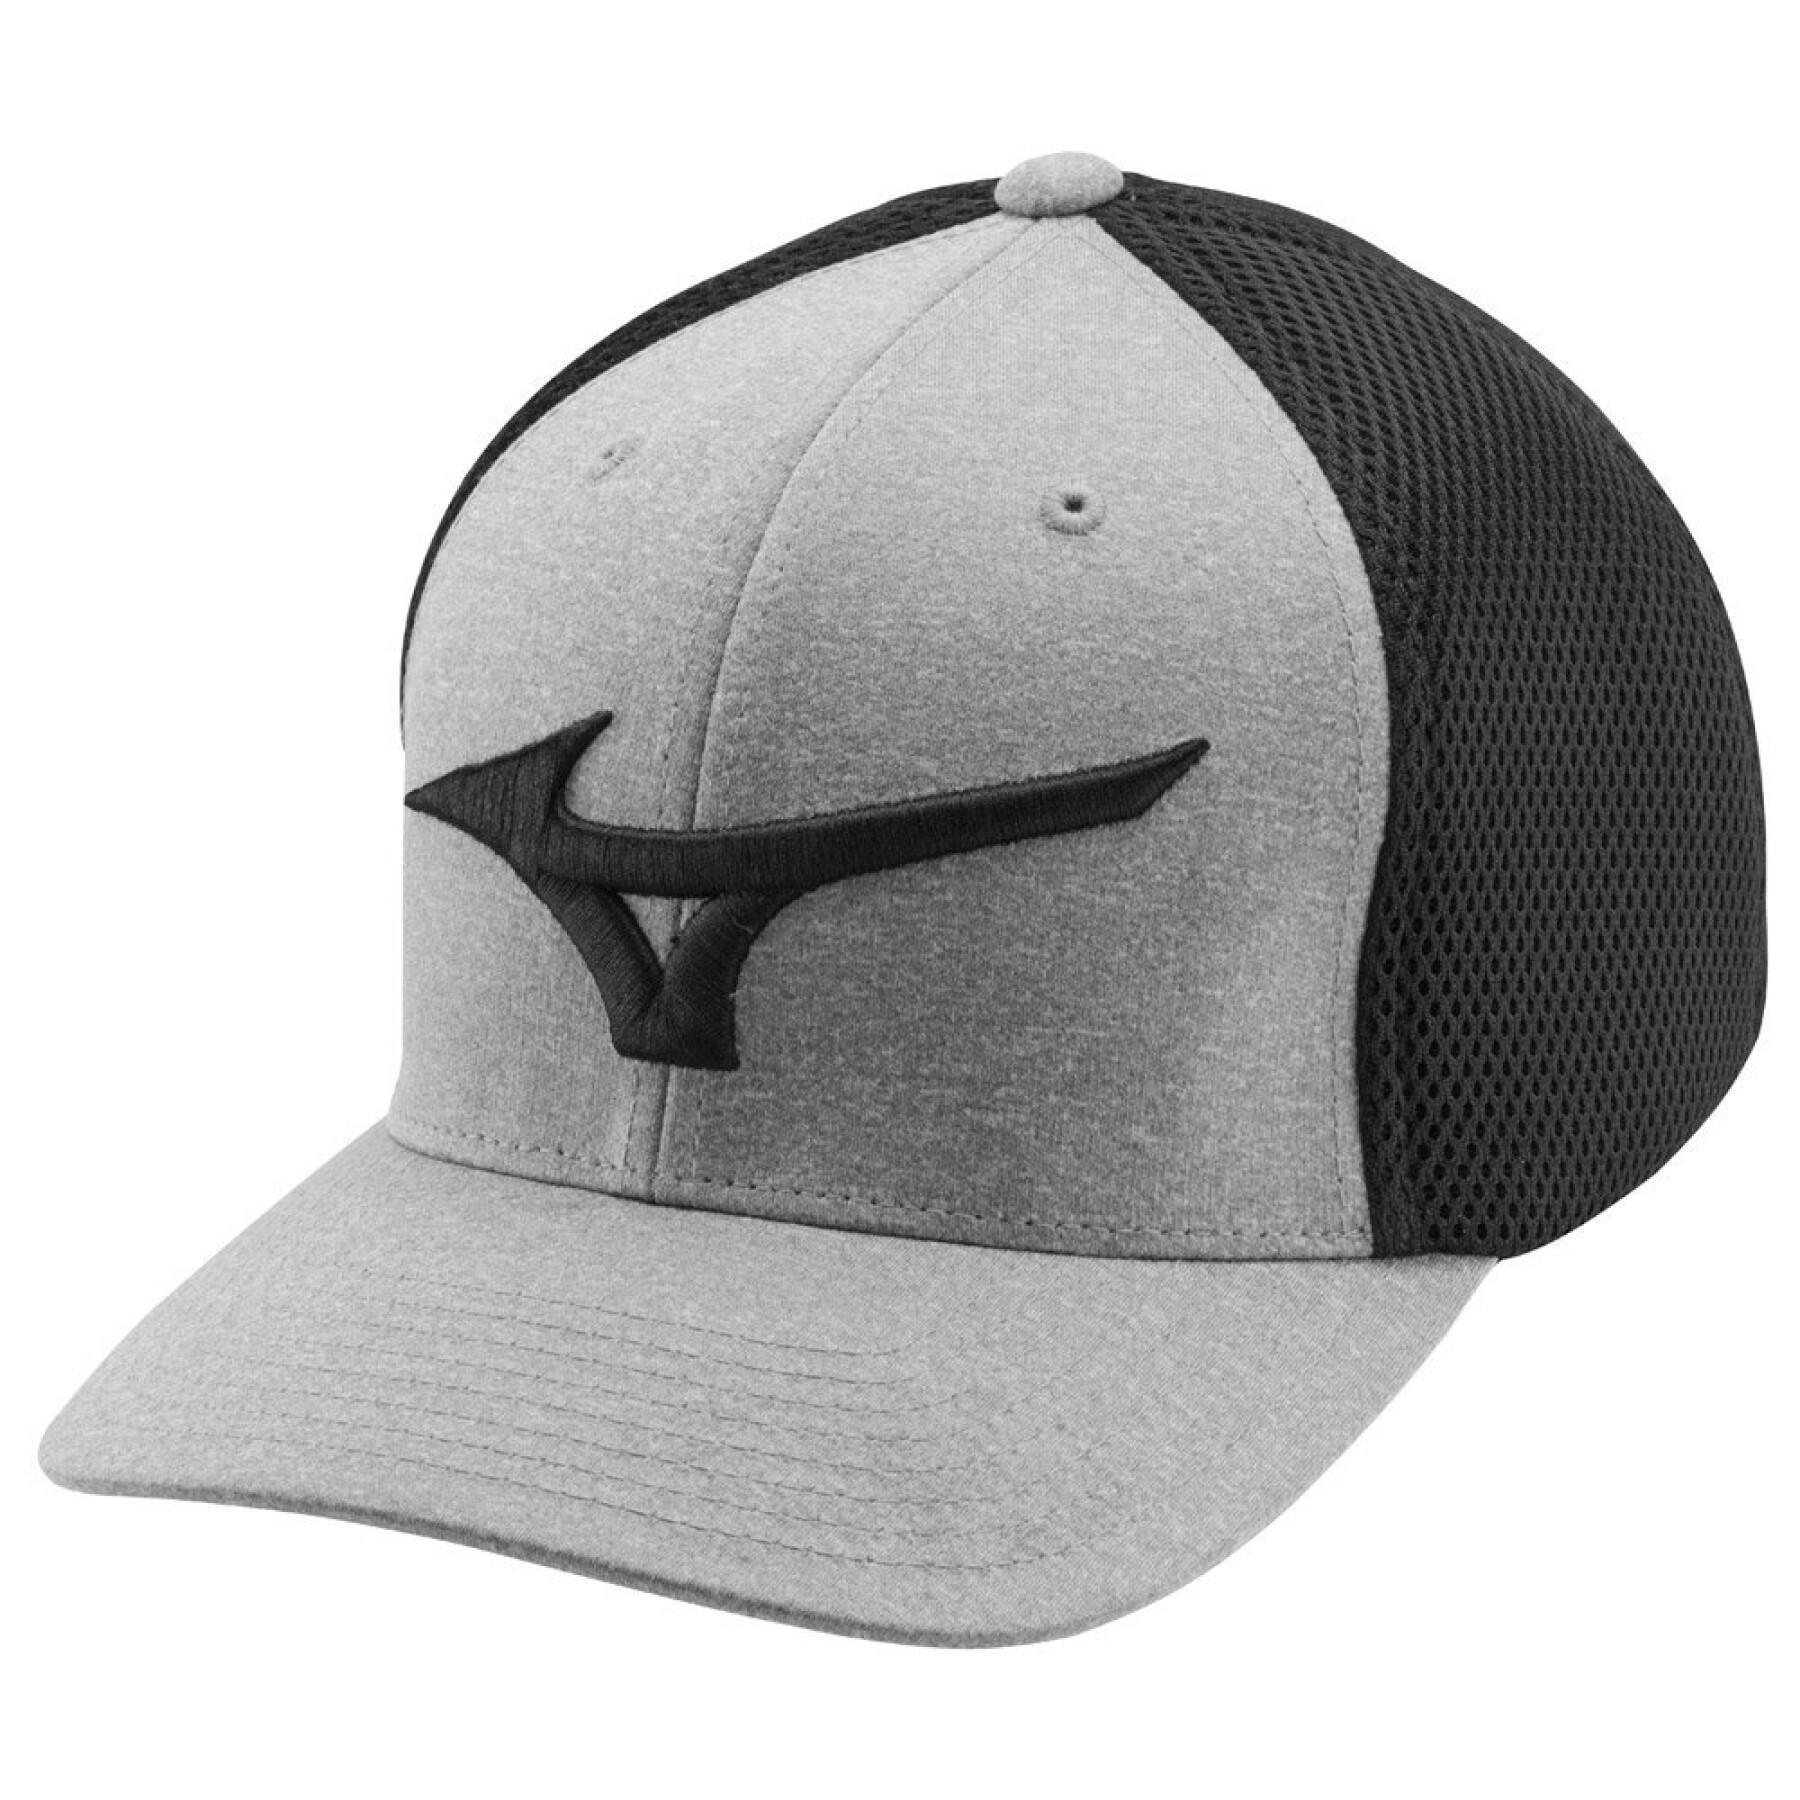 Cap Mizuno Fitted Meshbacked